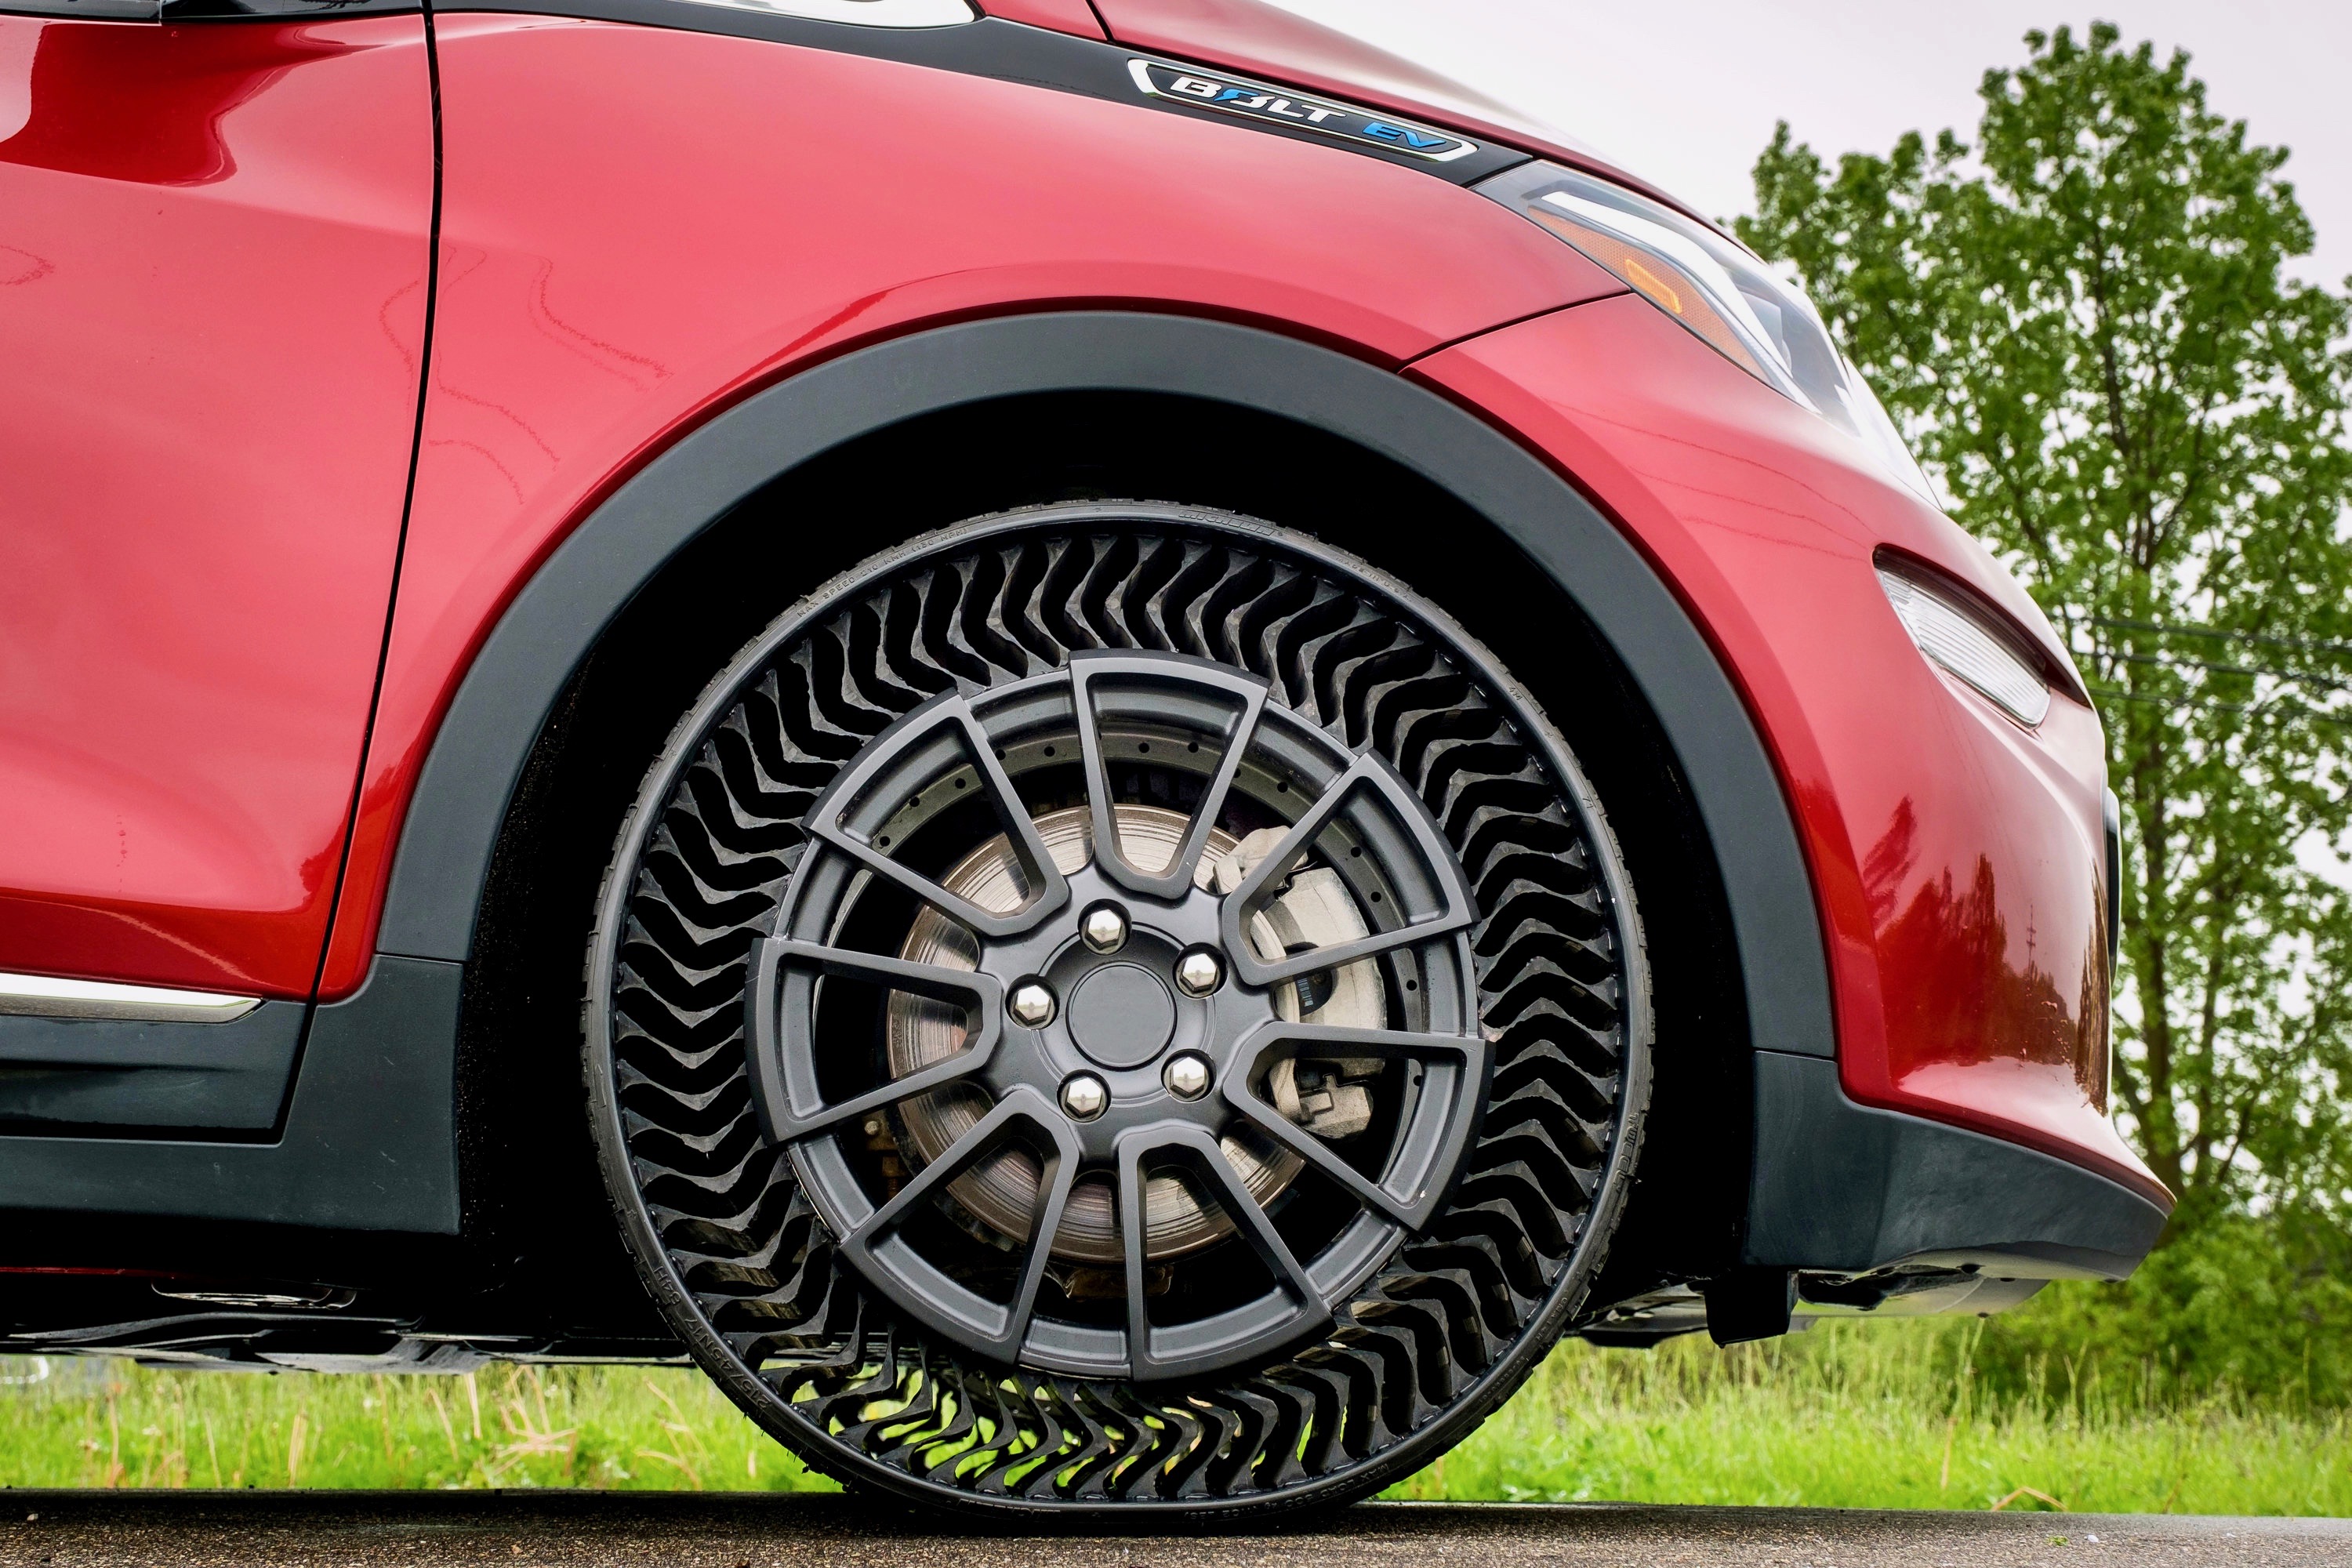 Airless tires, GM, Michelin want to take the air out of tires, ClassicCars.com Journal